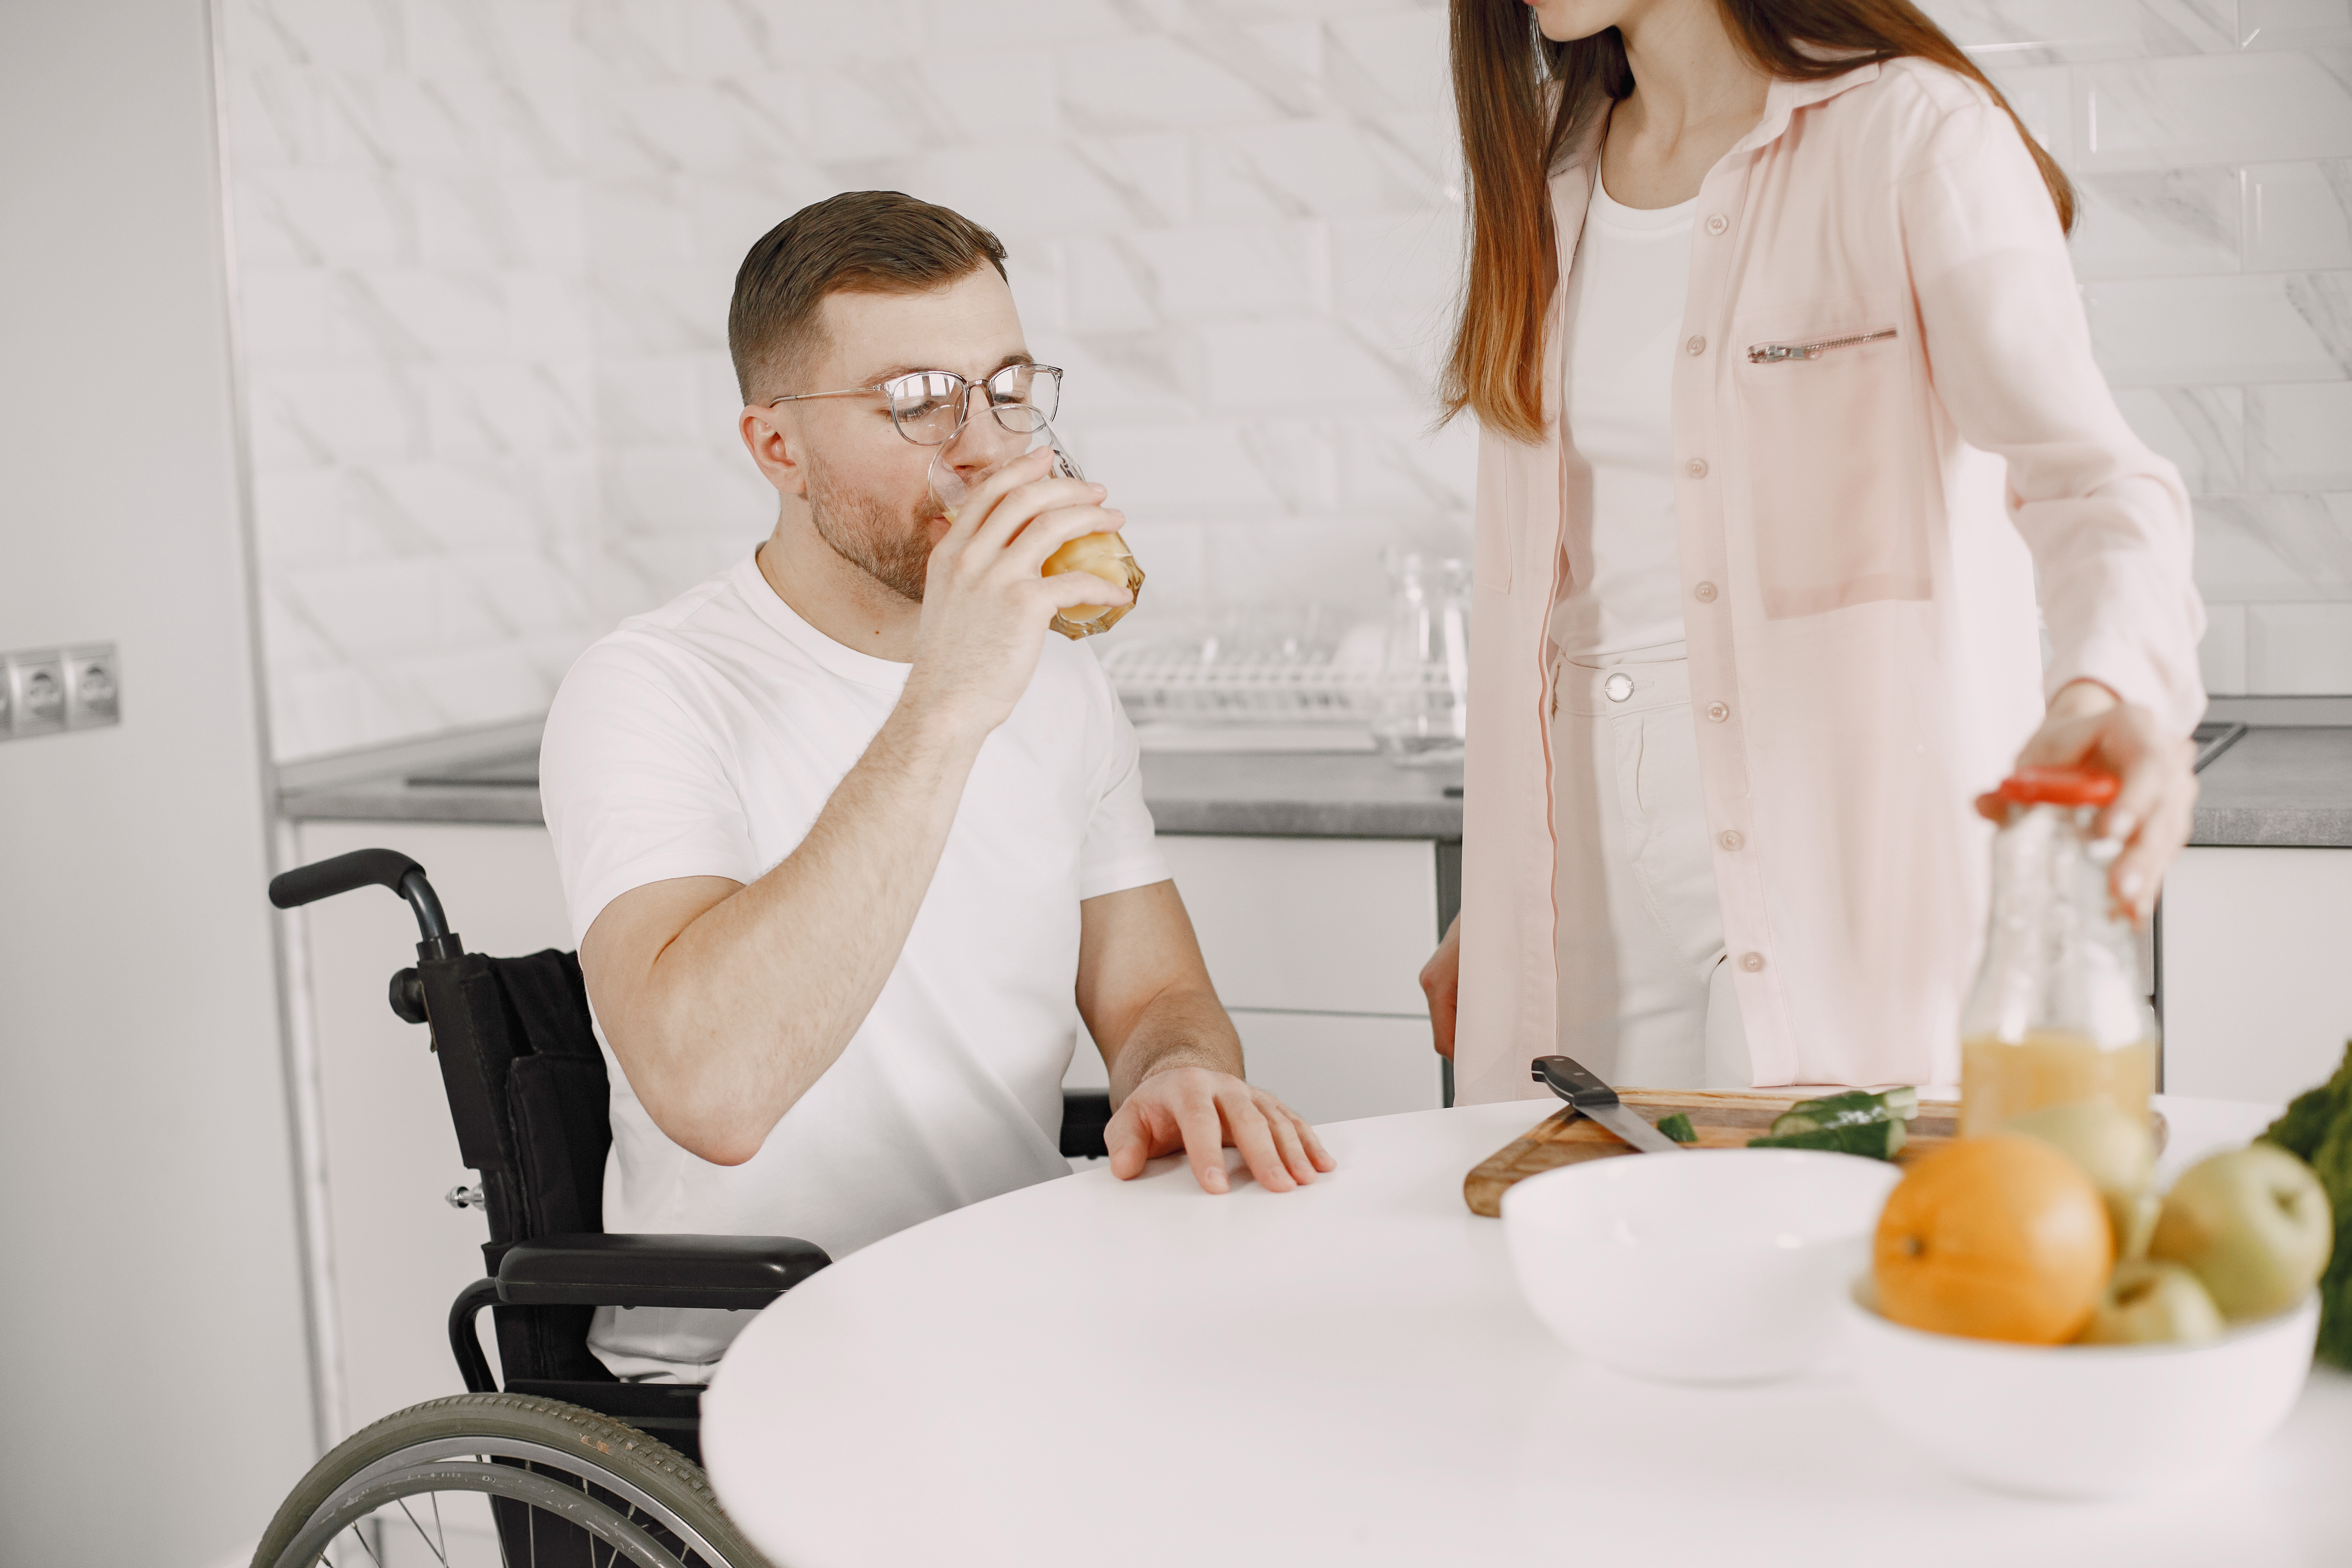 Woman With Disabled Man Wheelchair Having Breakfast Together Home